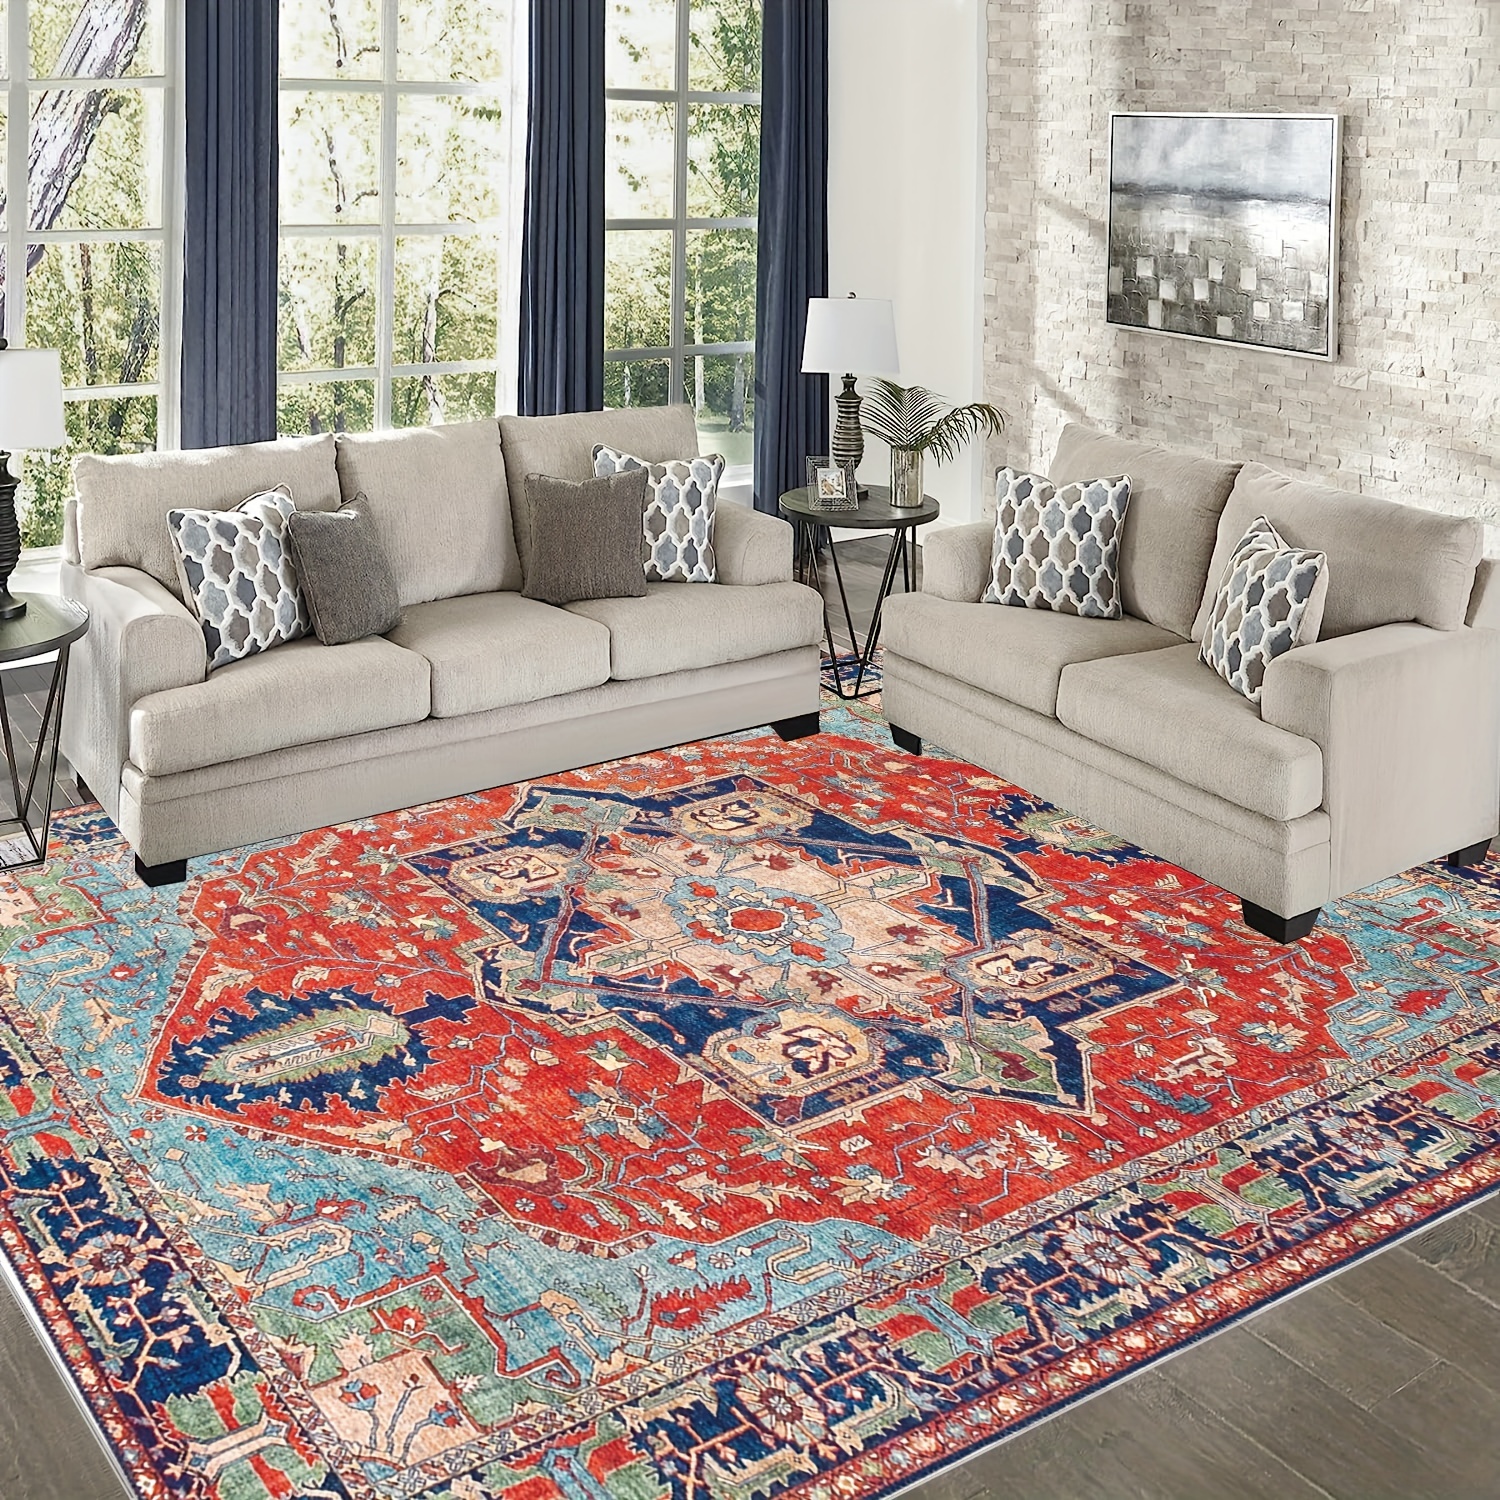 Turkish Rug Outdoor Entry Rug Rugs for Nursery Blue 